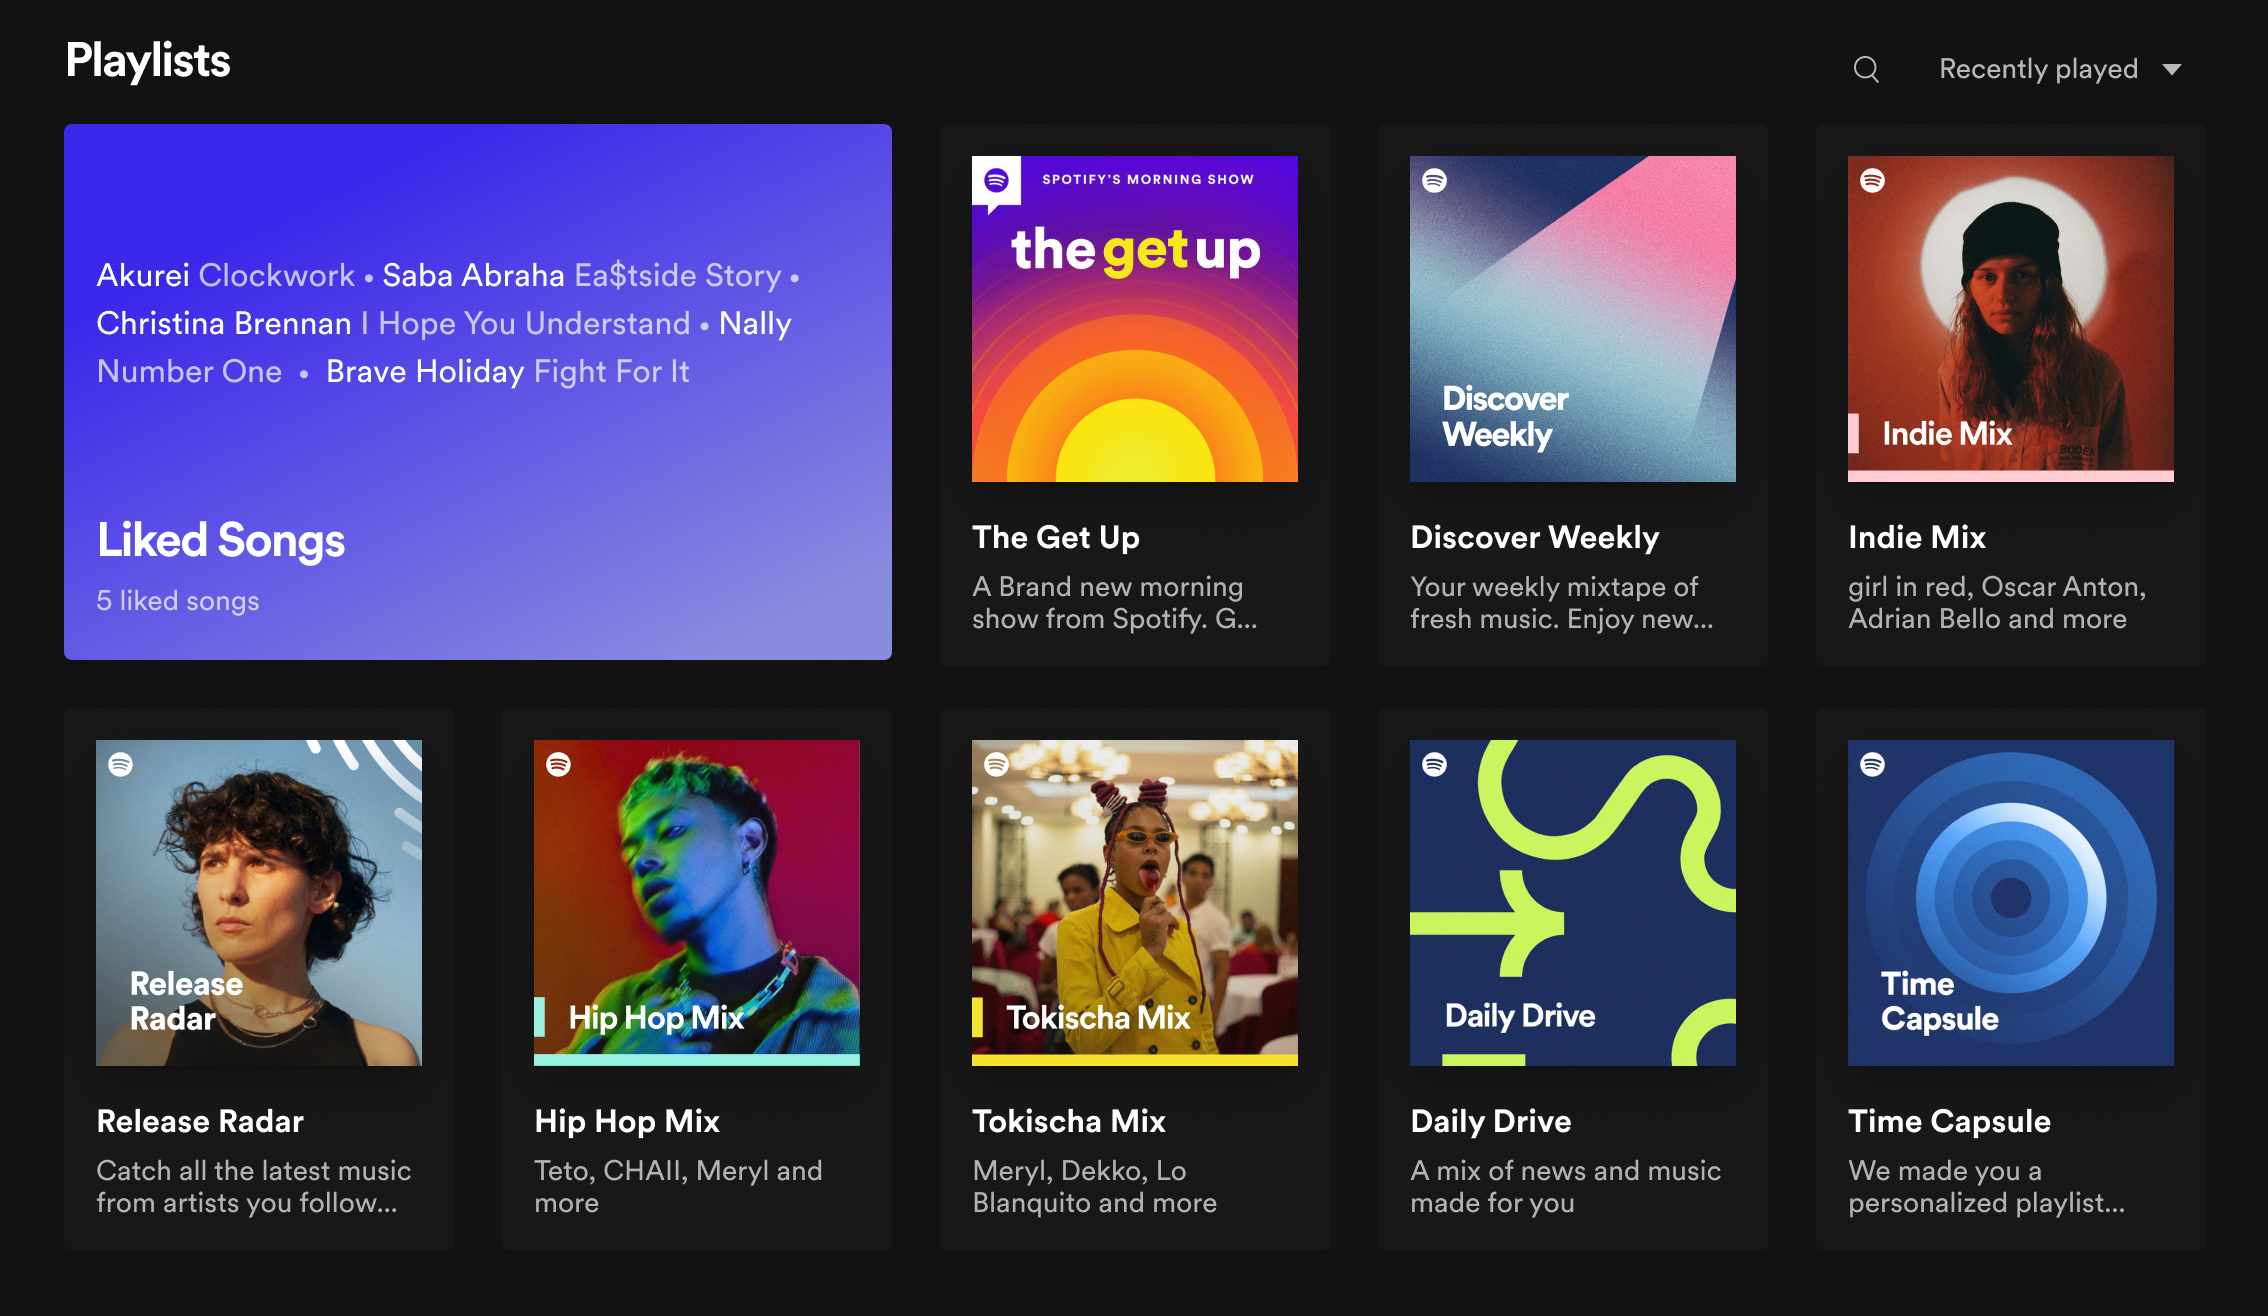 How to find deleted playlists on Spotify